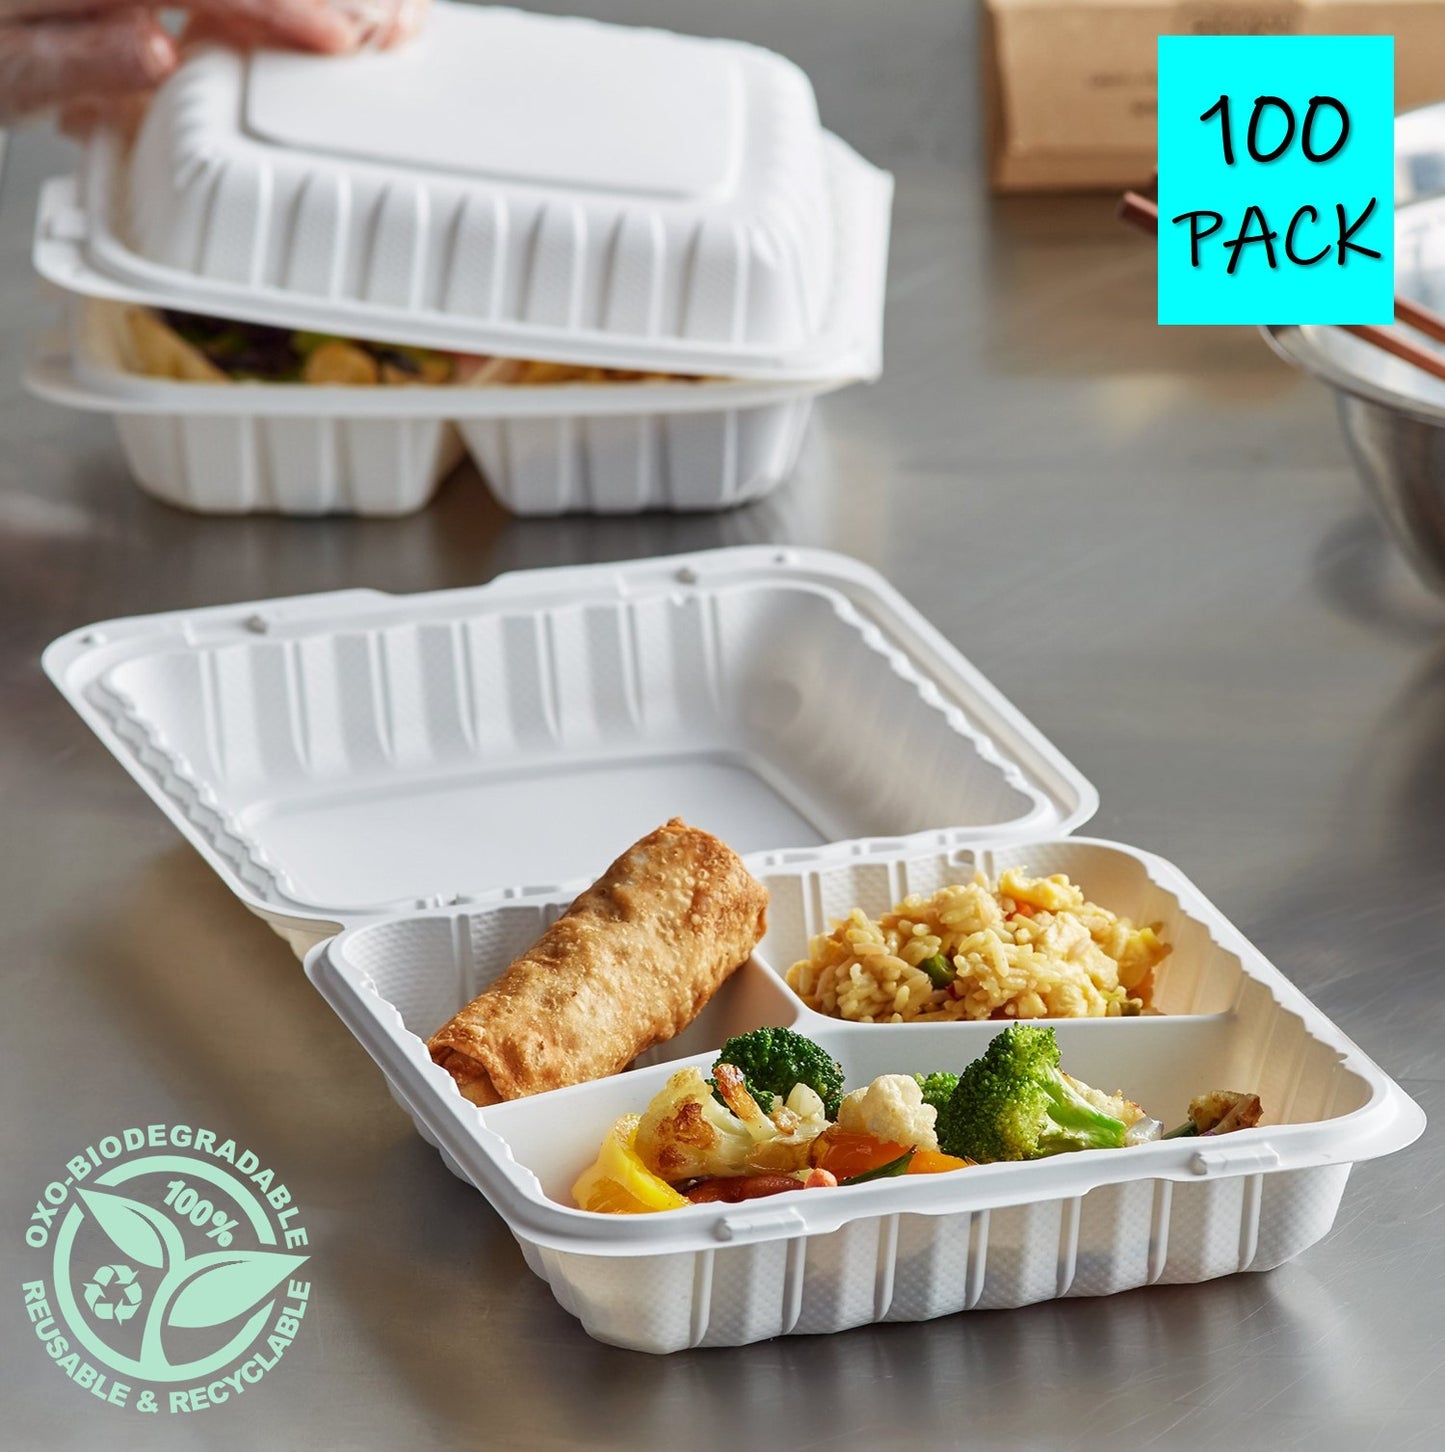 Take Out Clamshell 9" 3 Compartment 9X9X3 Microwaveable Eco-Friendly 100 Pack